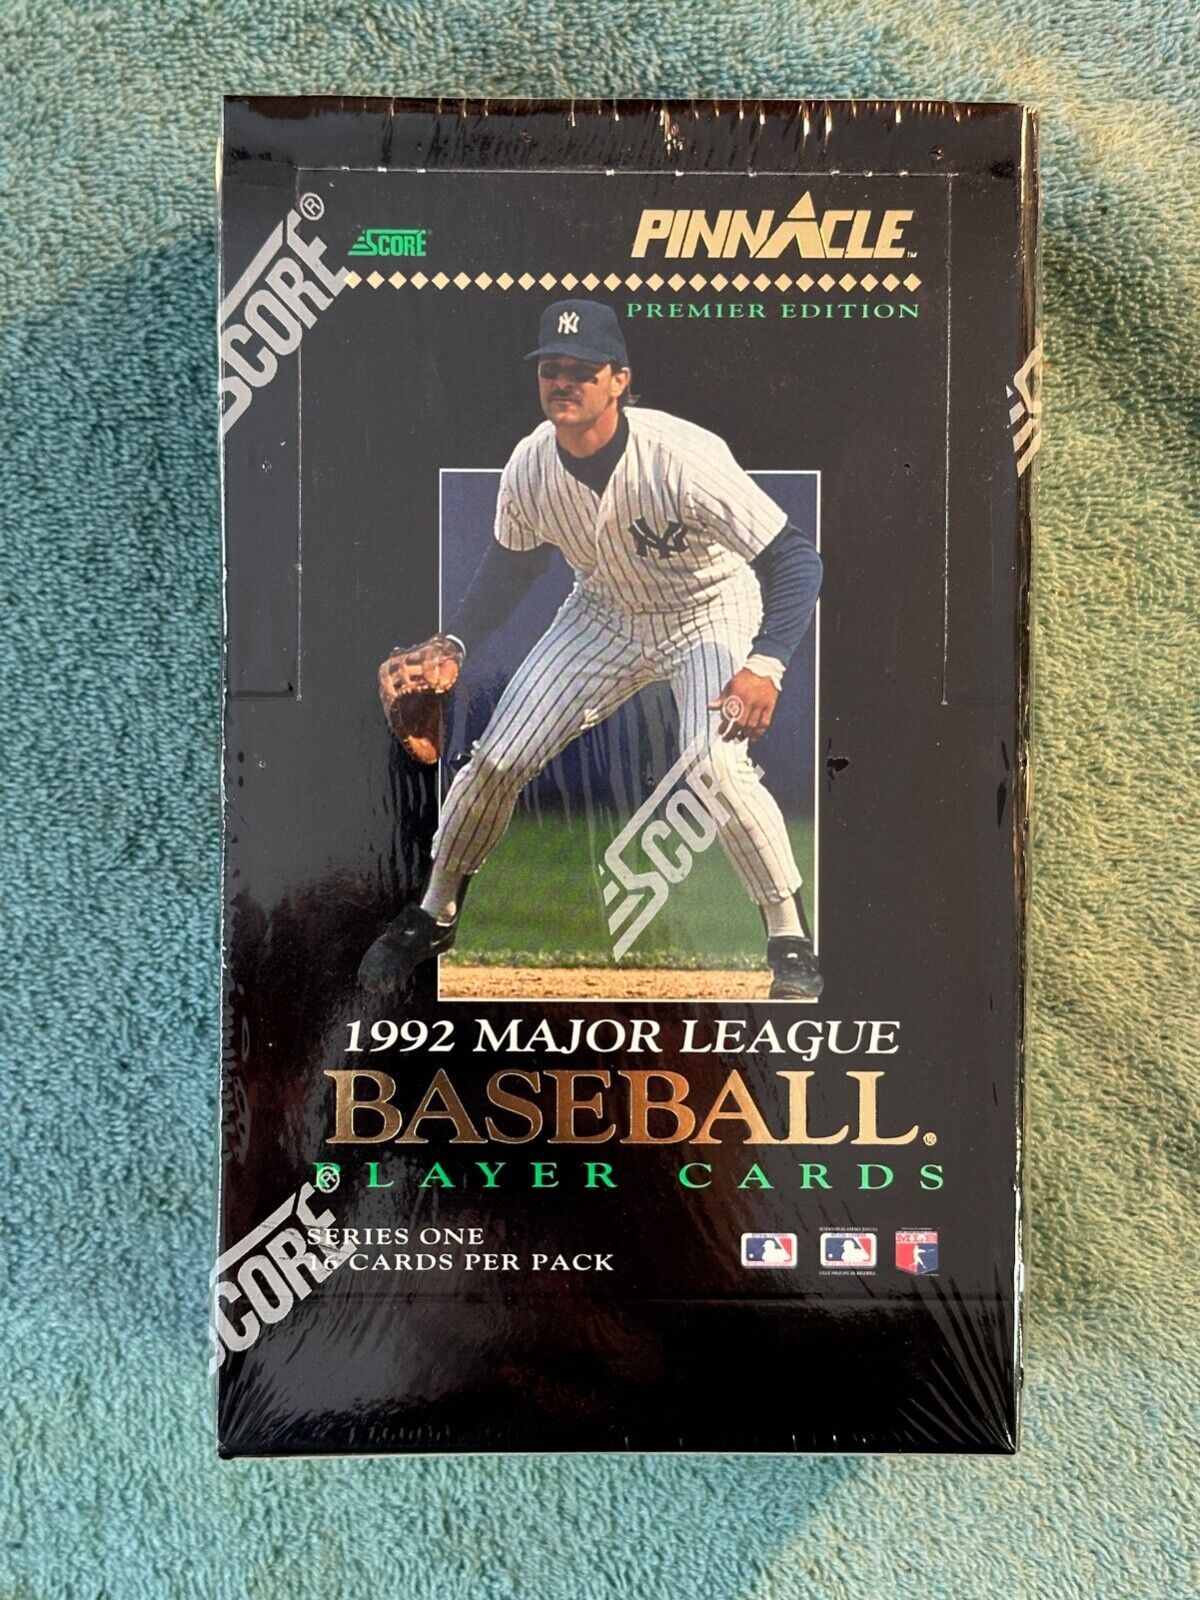 Pinnacle 1992 MLB Player Cards Series One Premier Edition 16 Cards Per Pack DM23